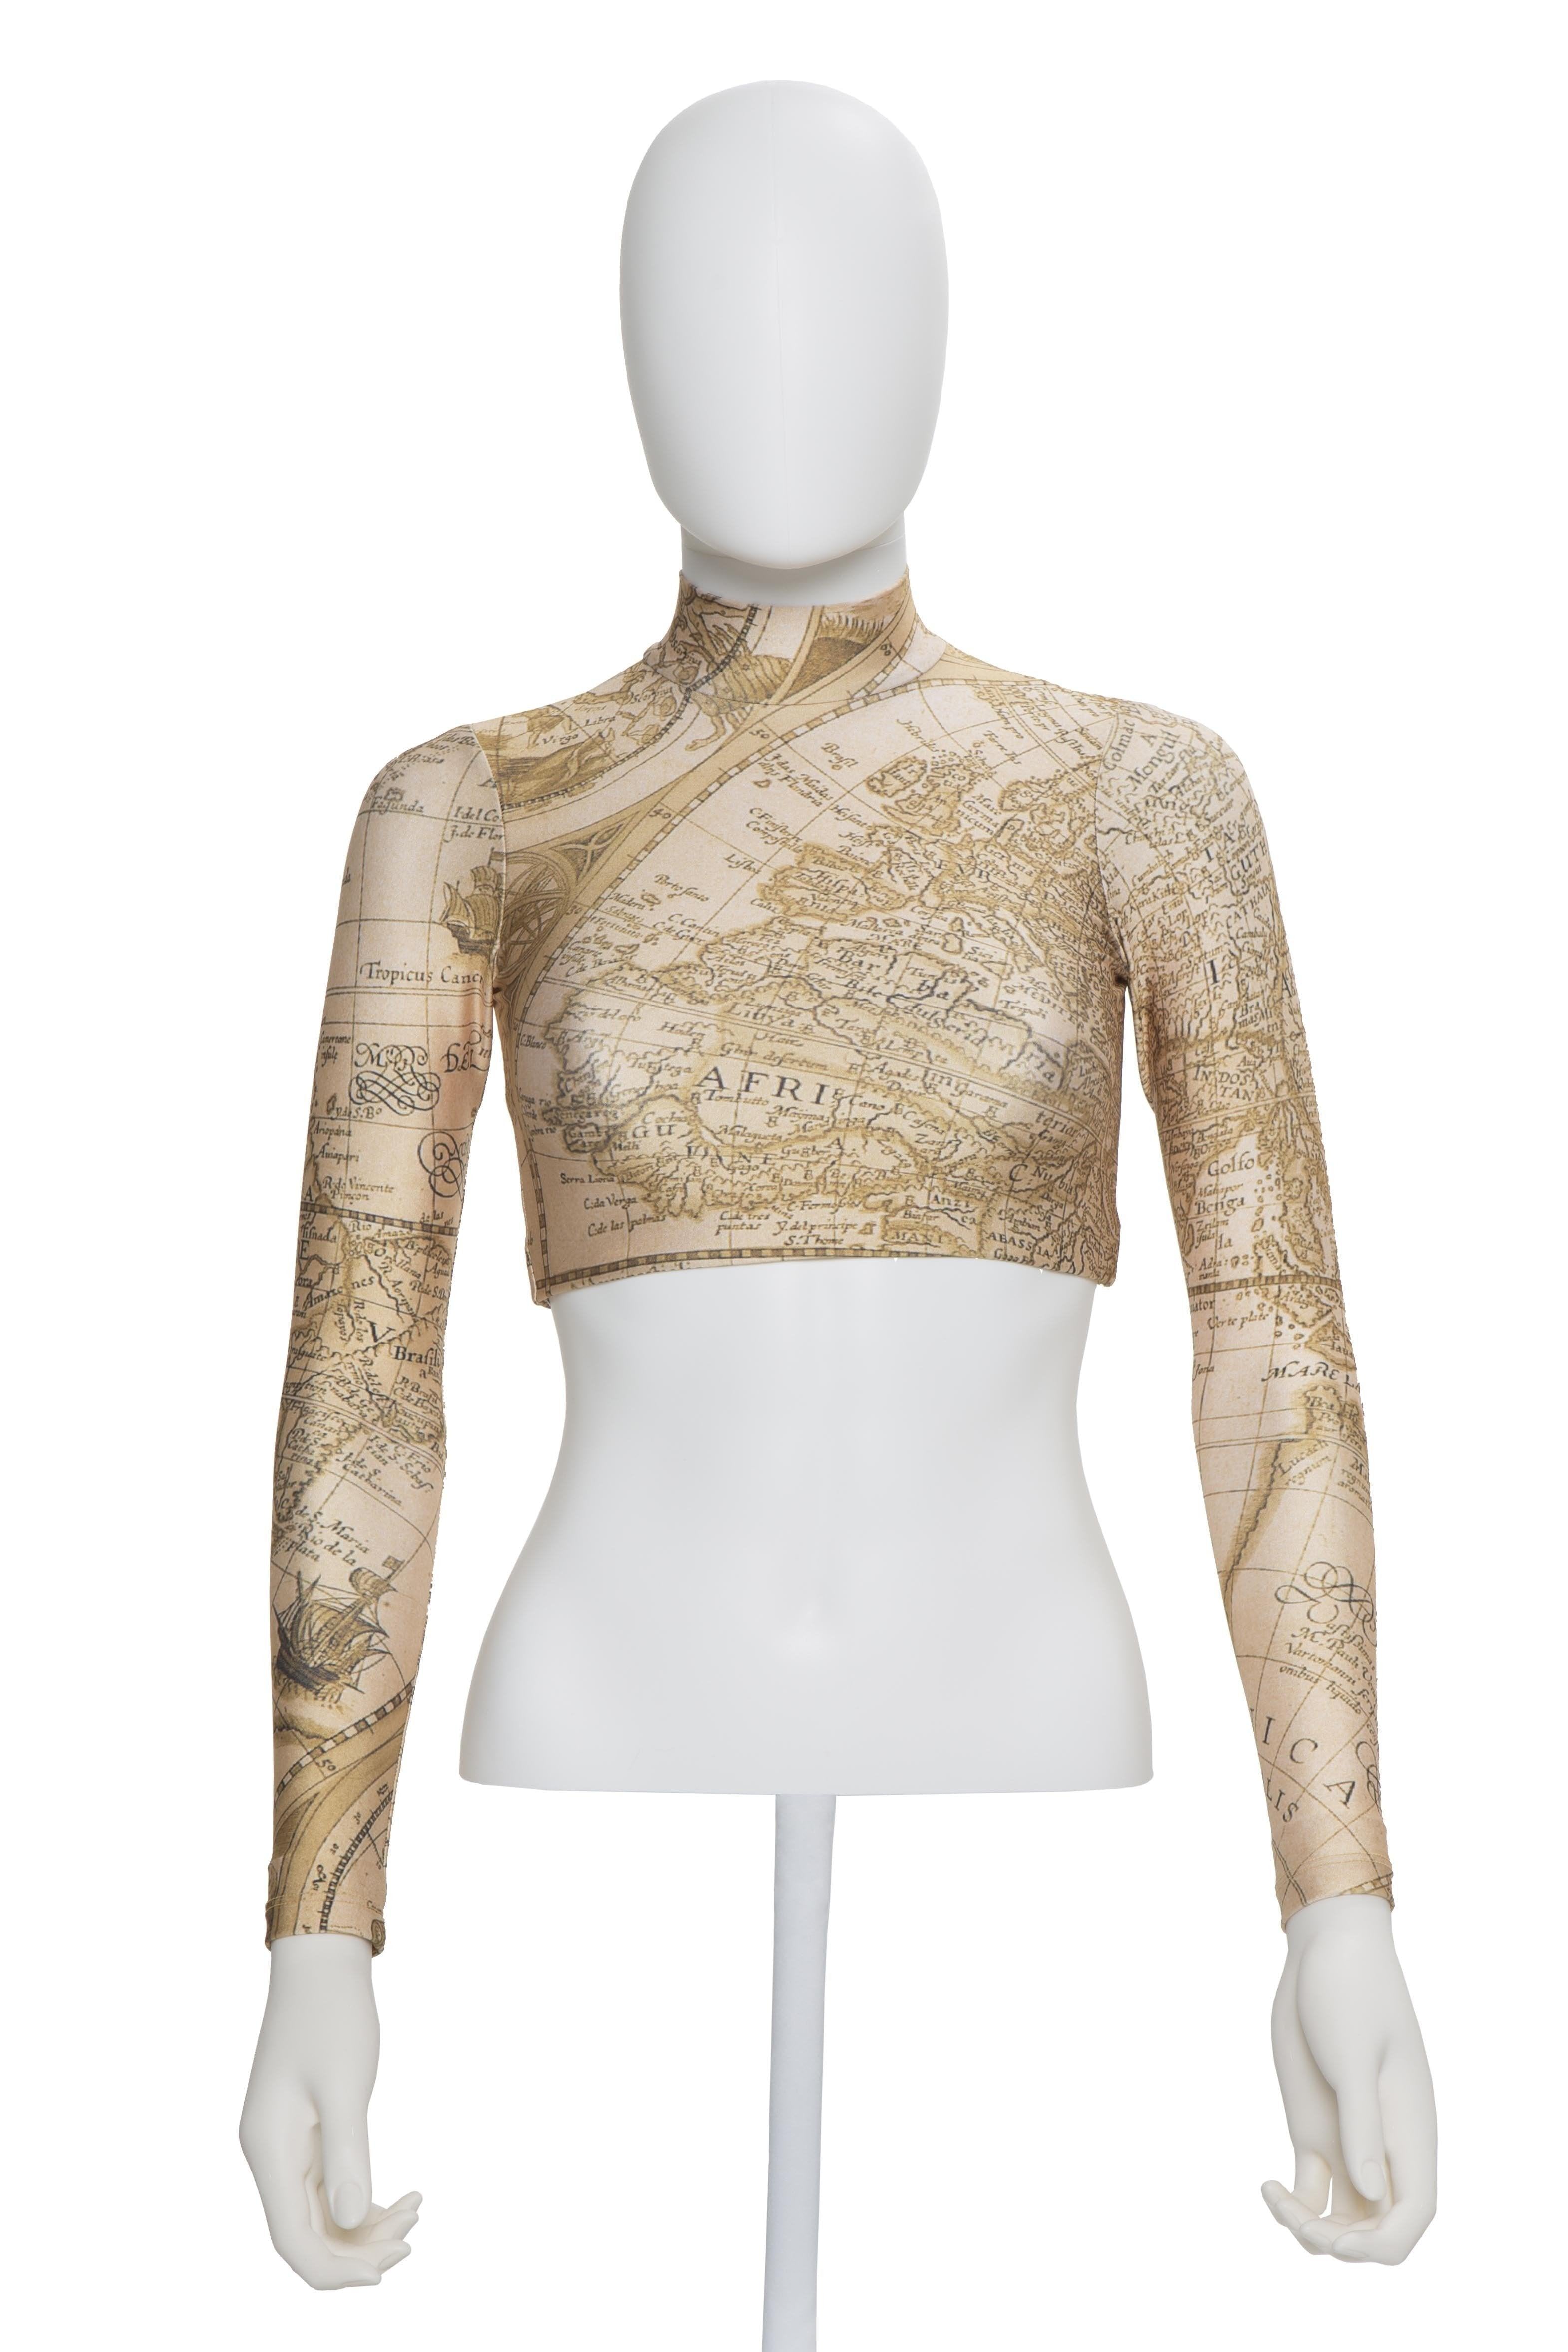 Voyager Long Sleeve Crop Top - Hamilton Theatrical